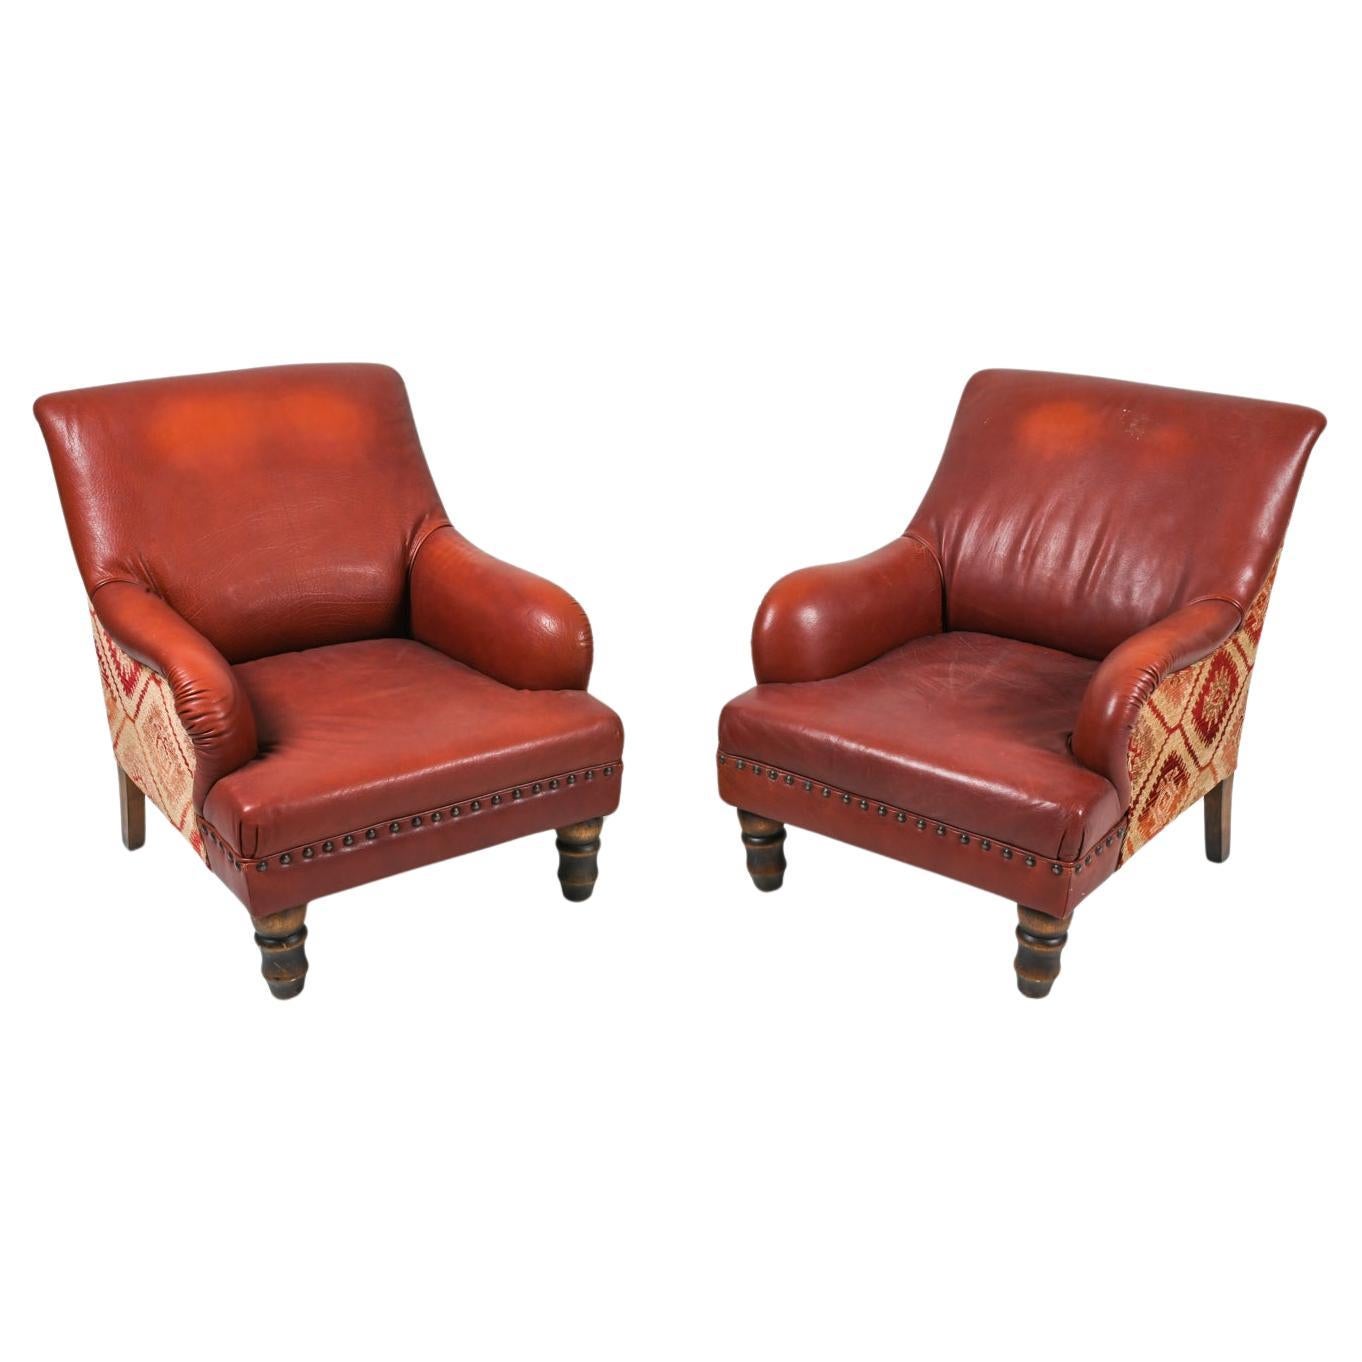 Pair of Roche Bobois Leather & Kilim Lounge Chairs